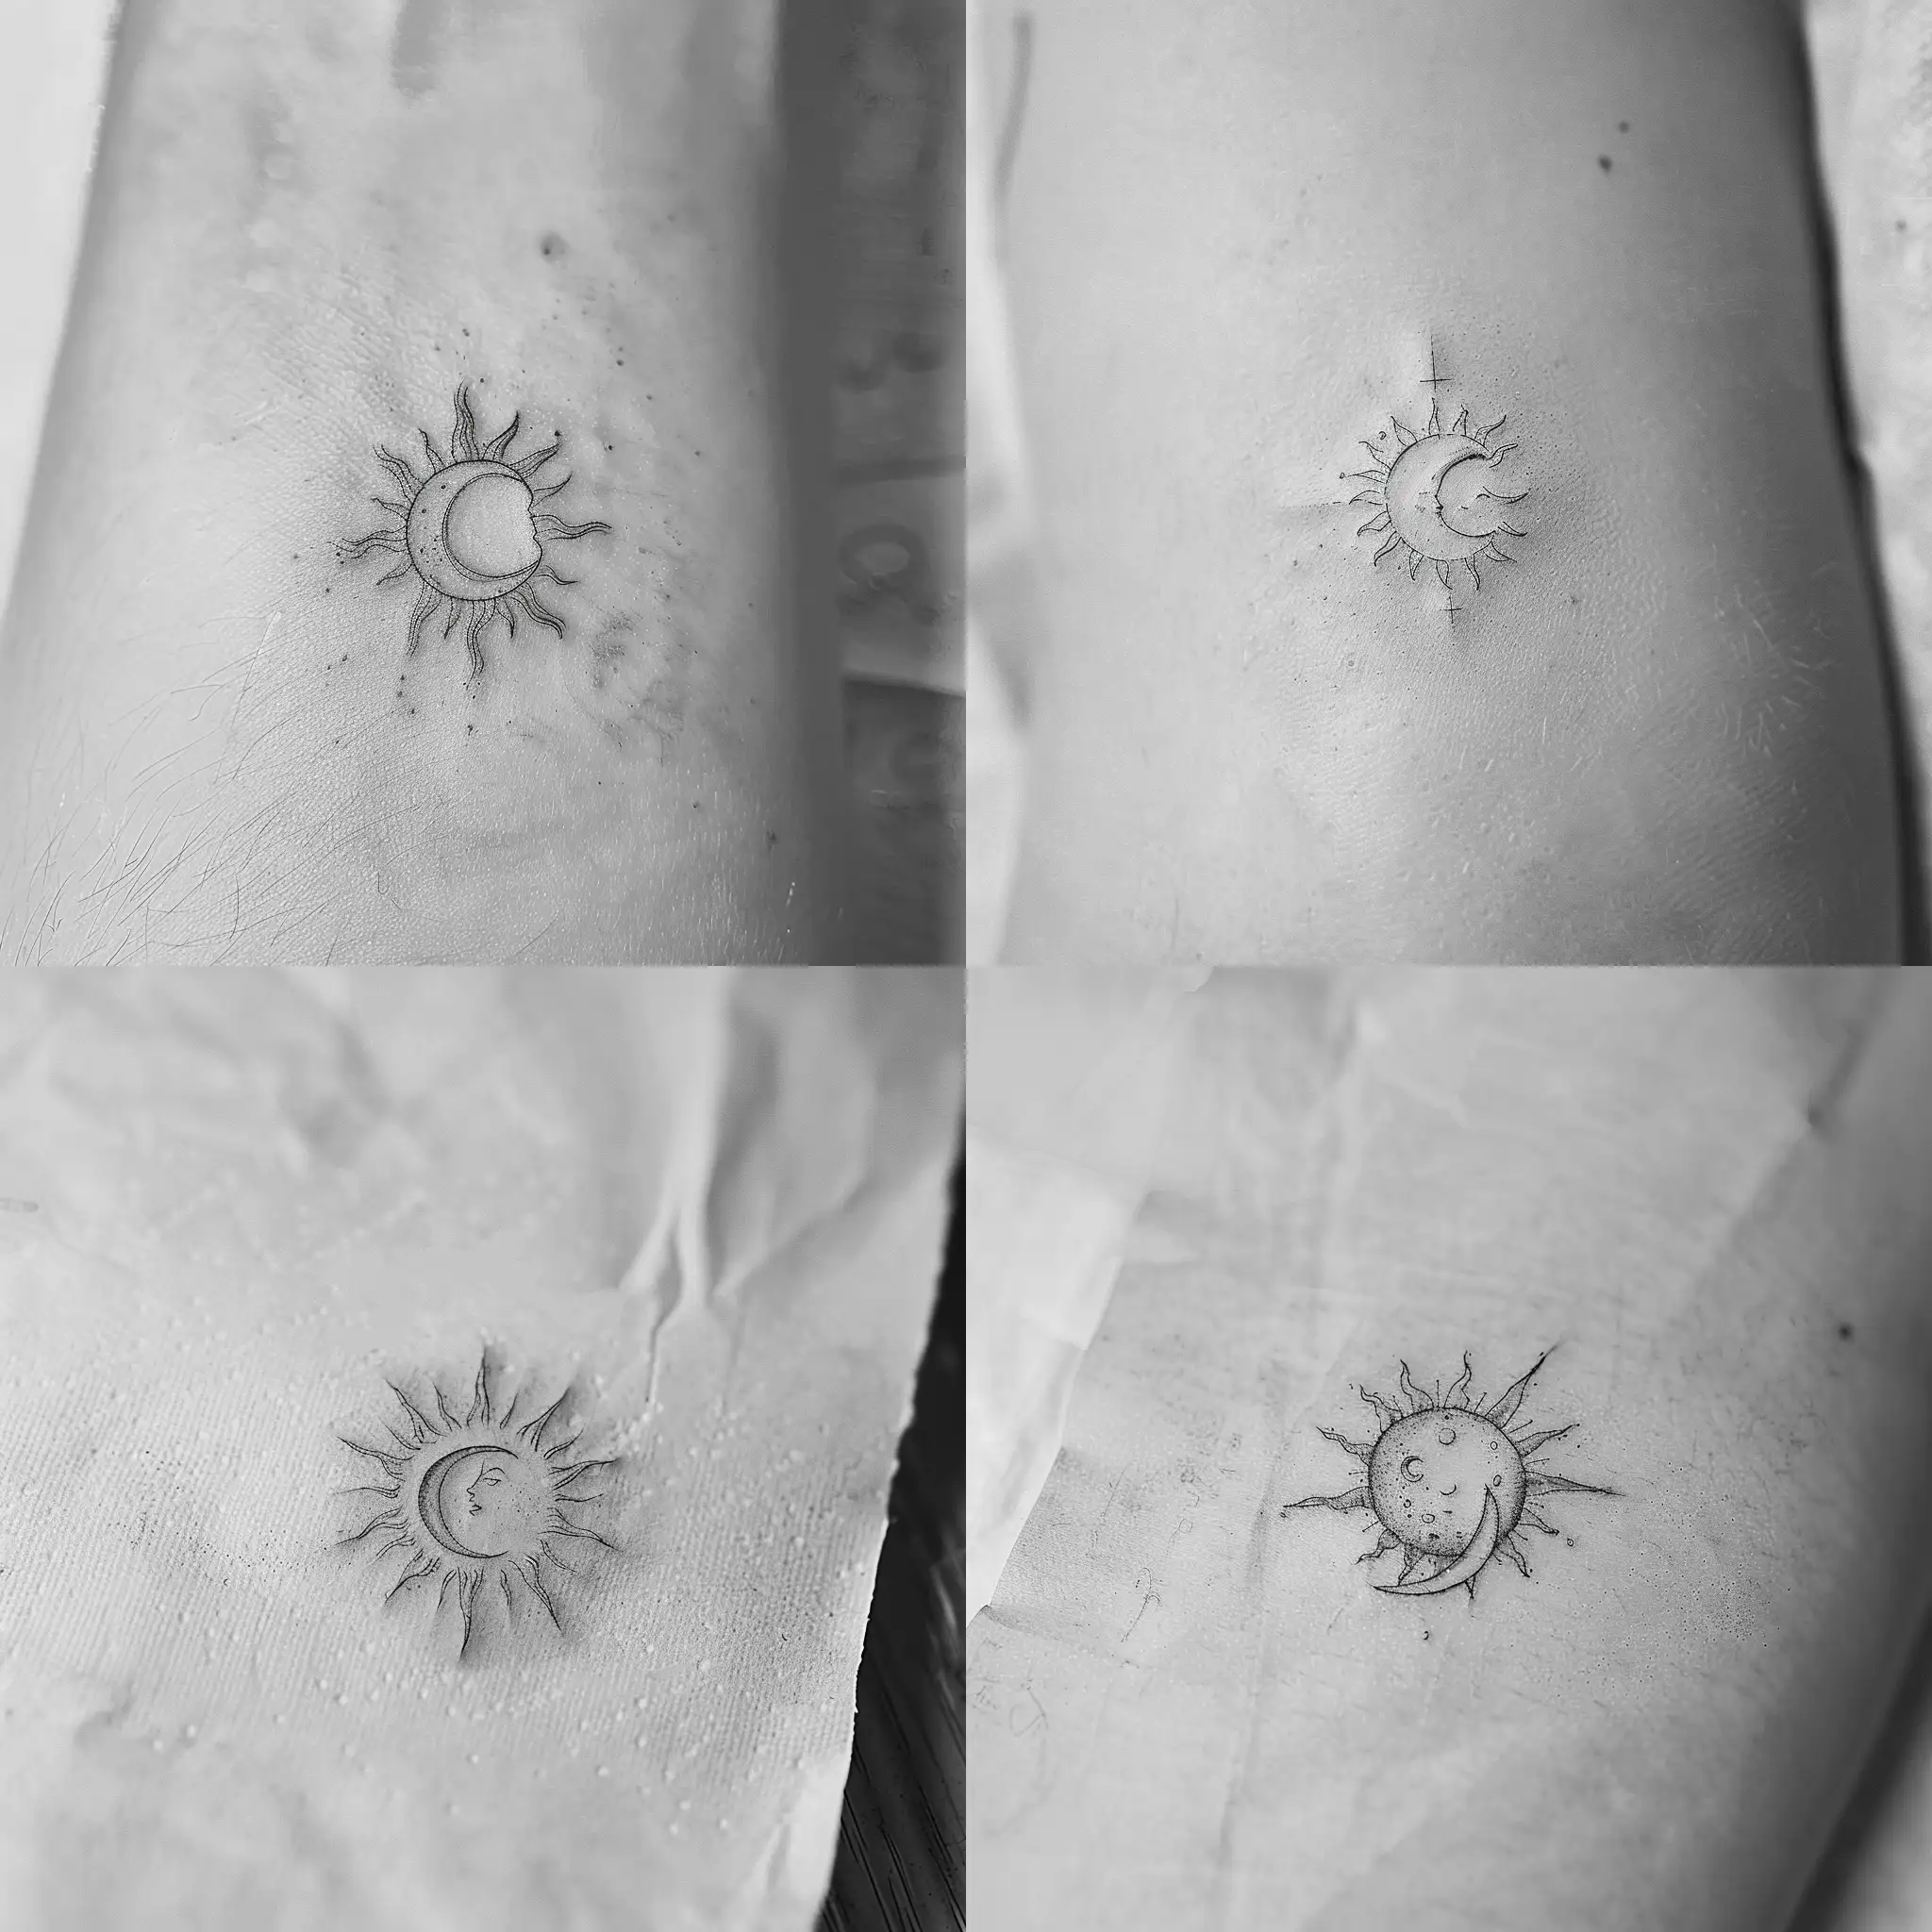 make a sketch of a small black and white 4x4 cm tattoo, where the sun and moon will be and nothing else. contour tattoo style